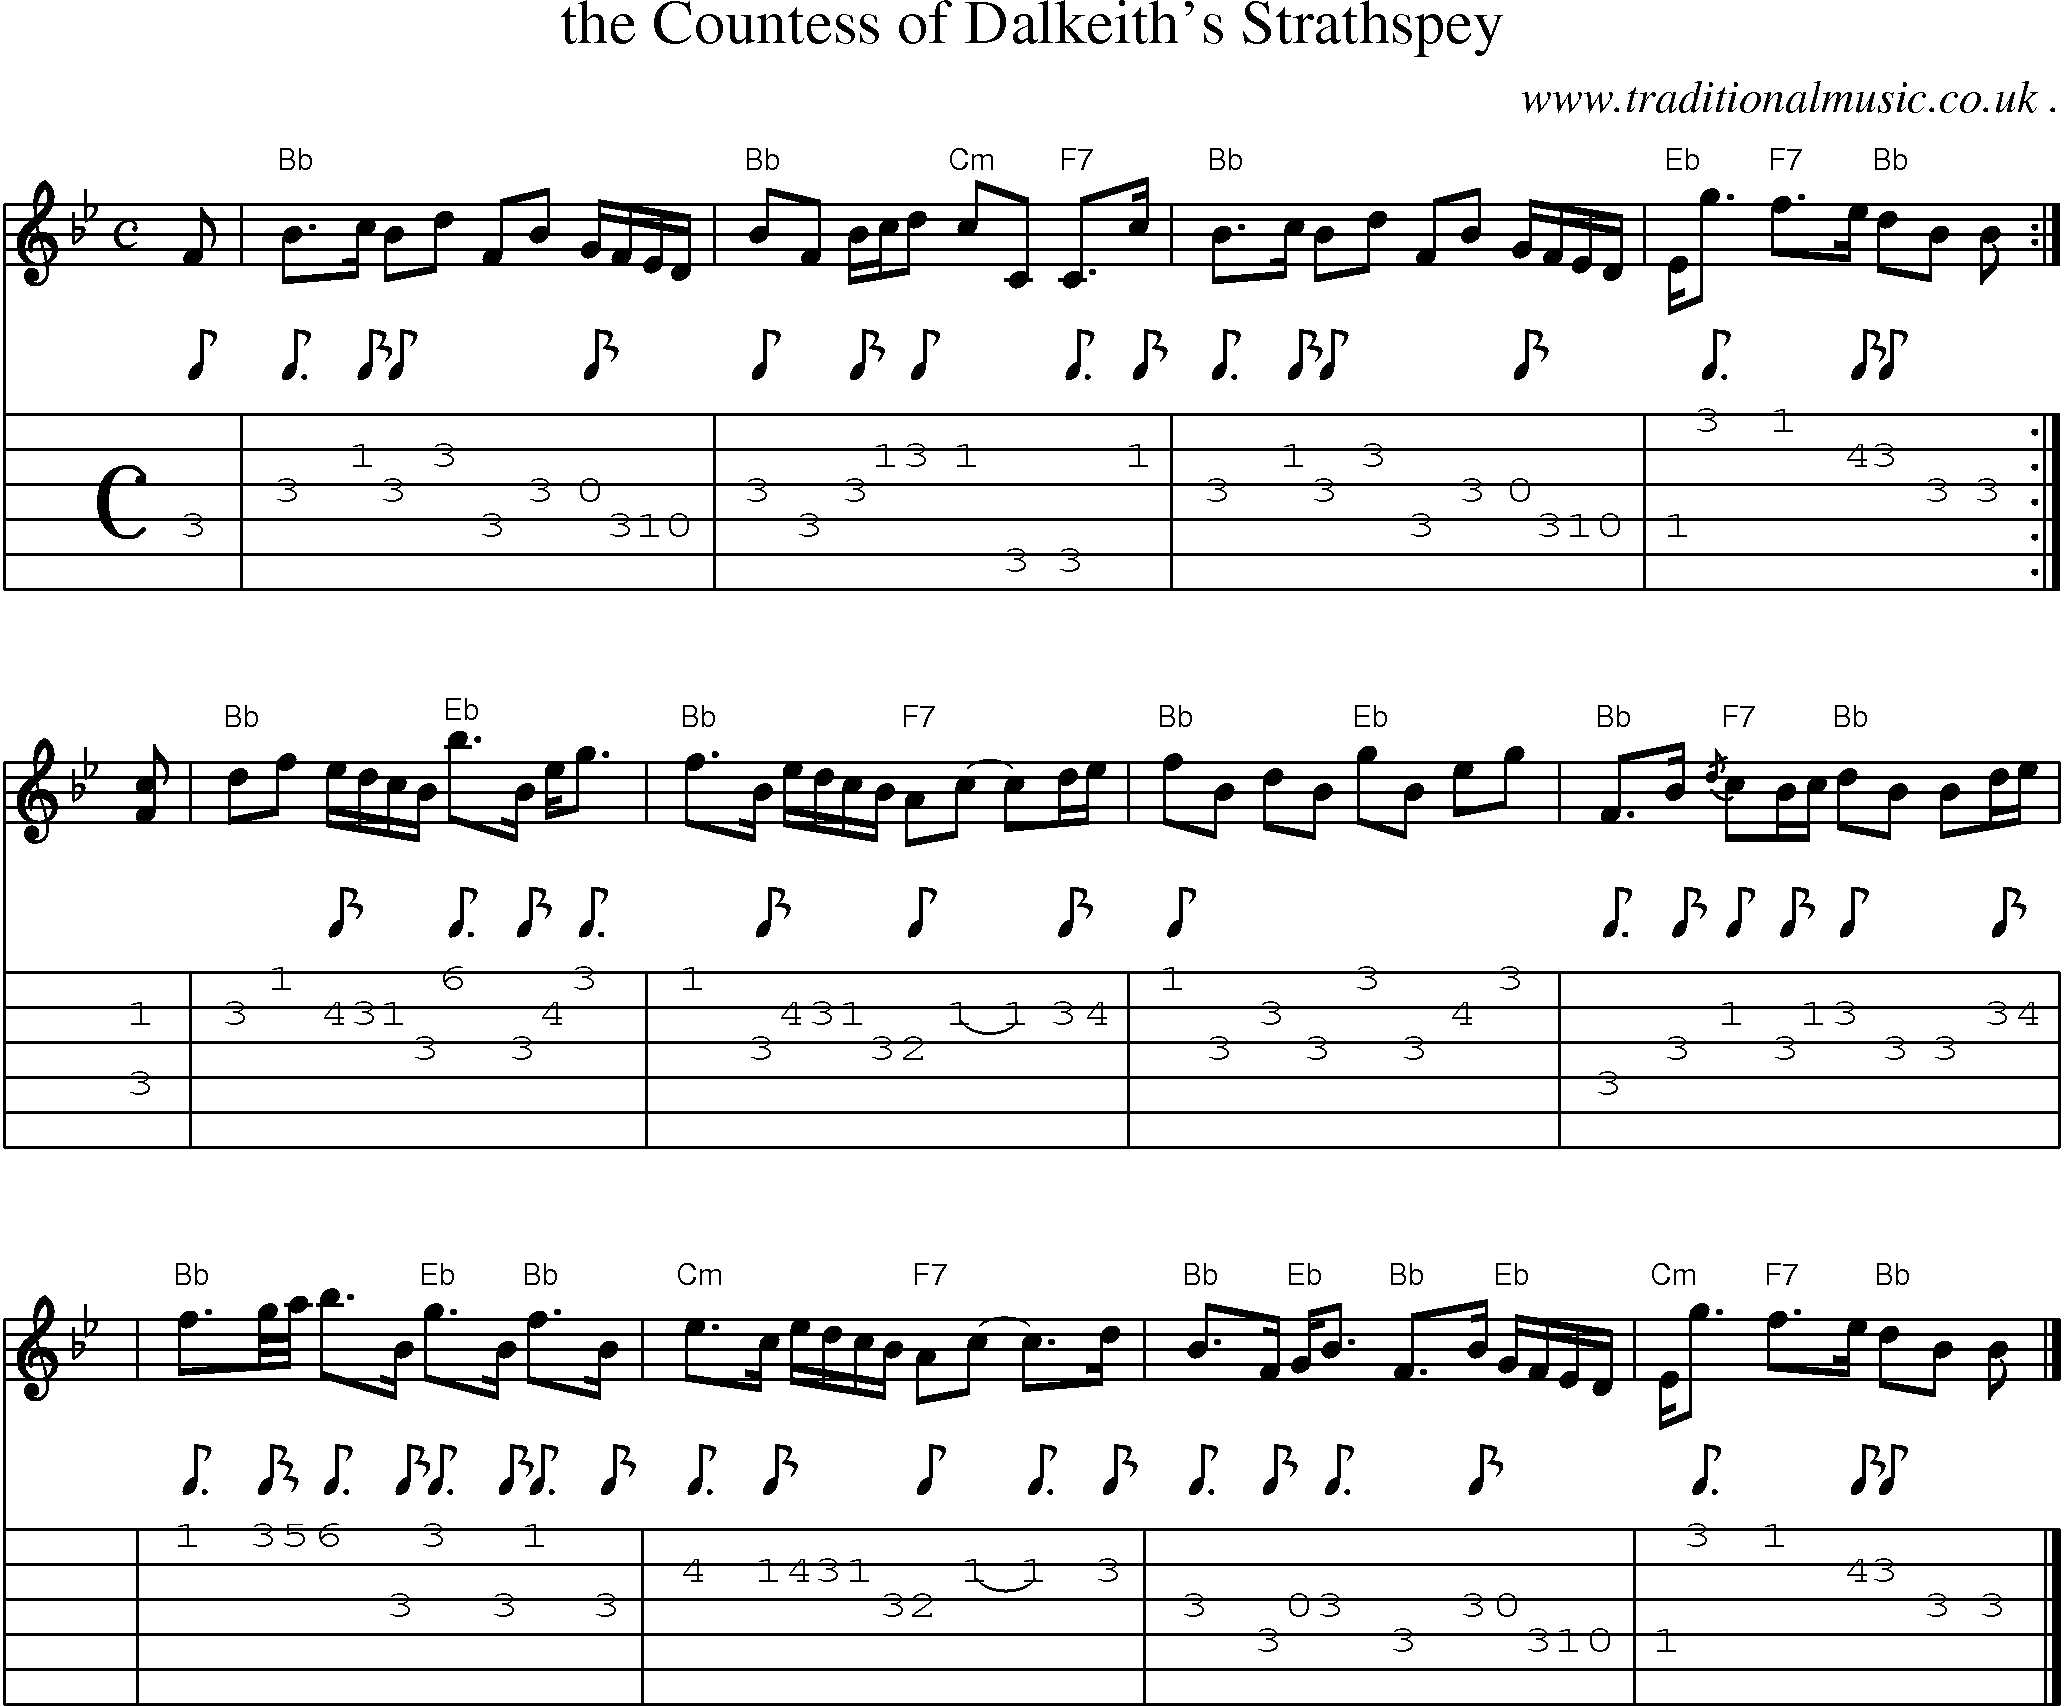 Sheet-music  score, Chords and Guitar Tabs for The Countess Of Dalkeiths Strathspey